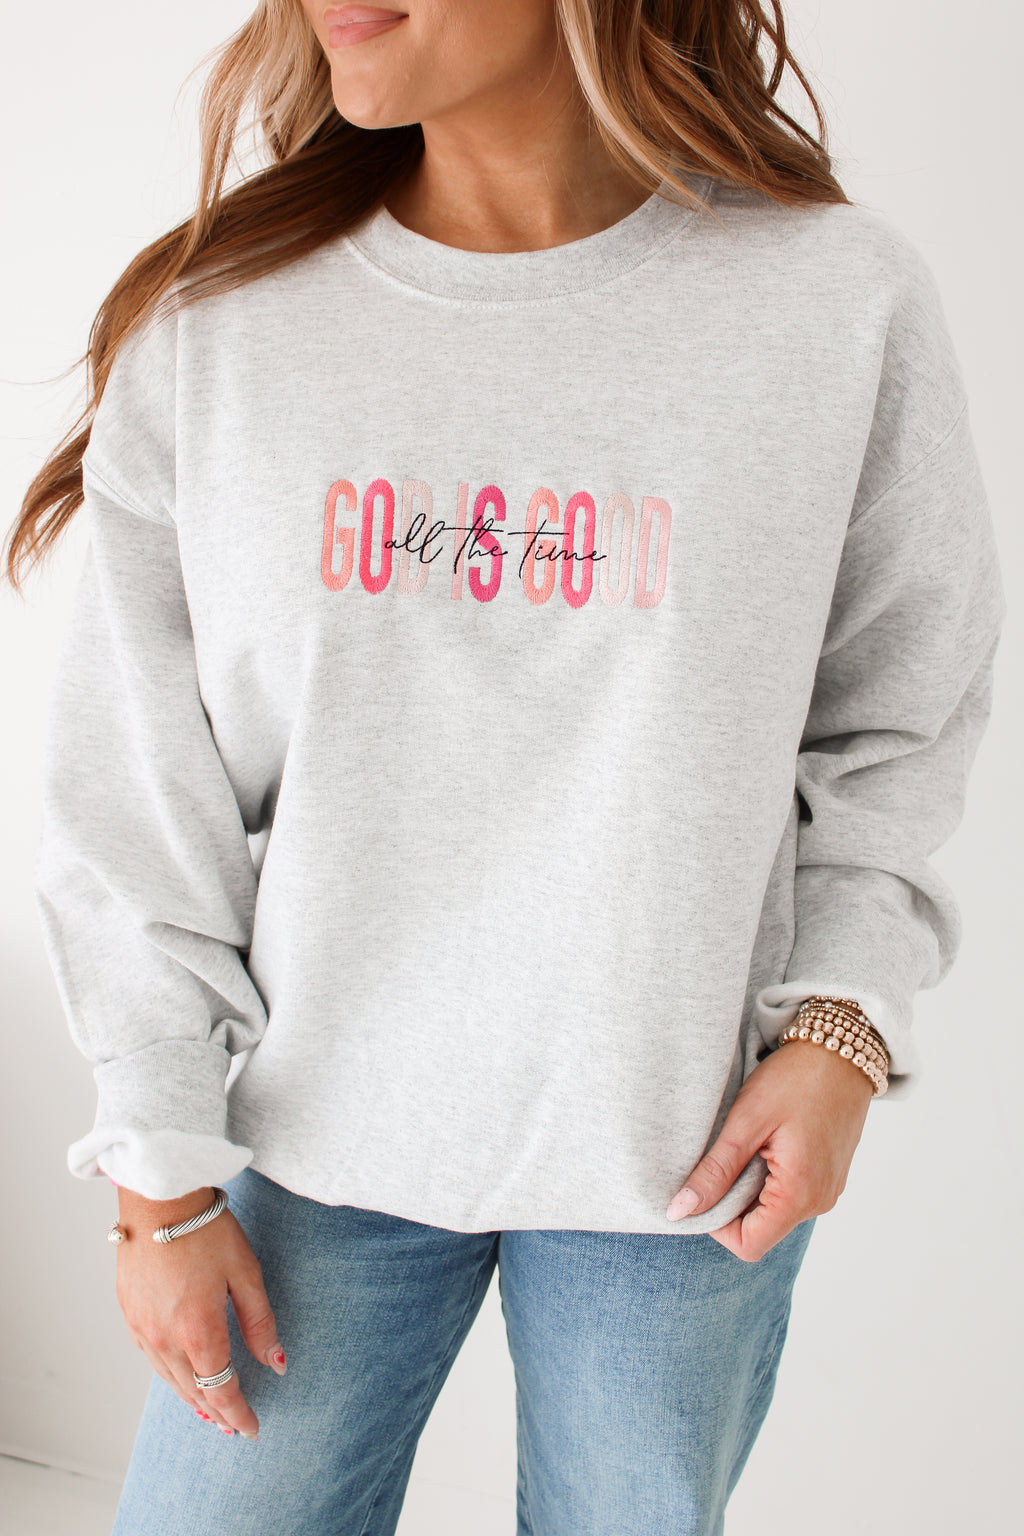 GOD IS GOOD ALL THE TIME SWEATSHIRT